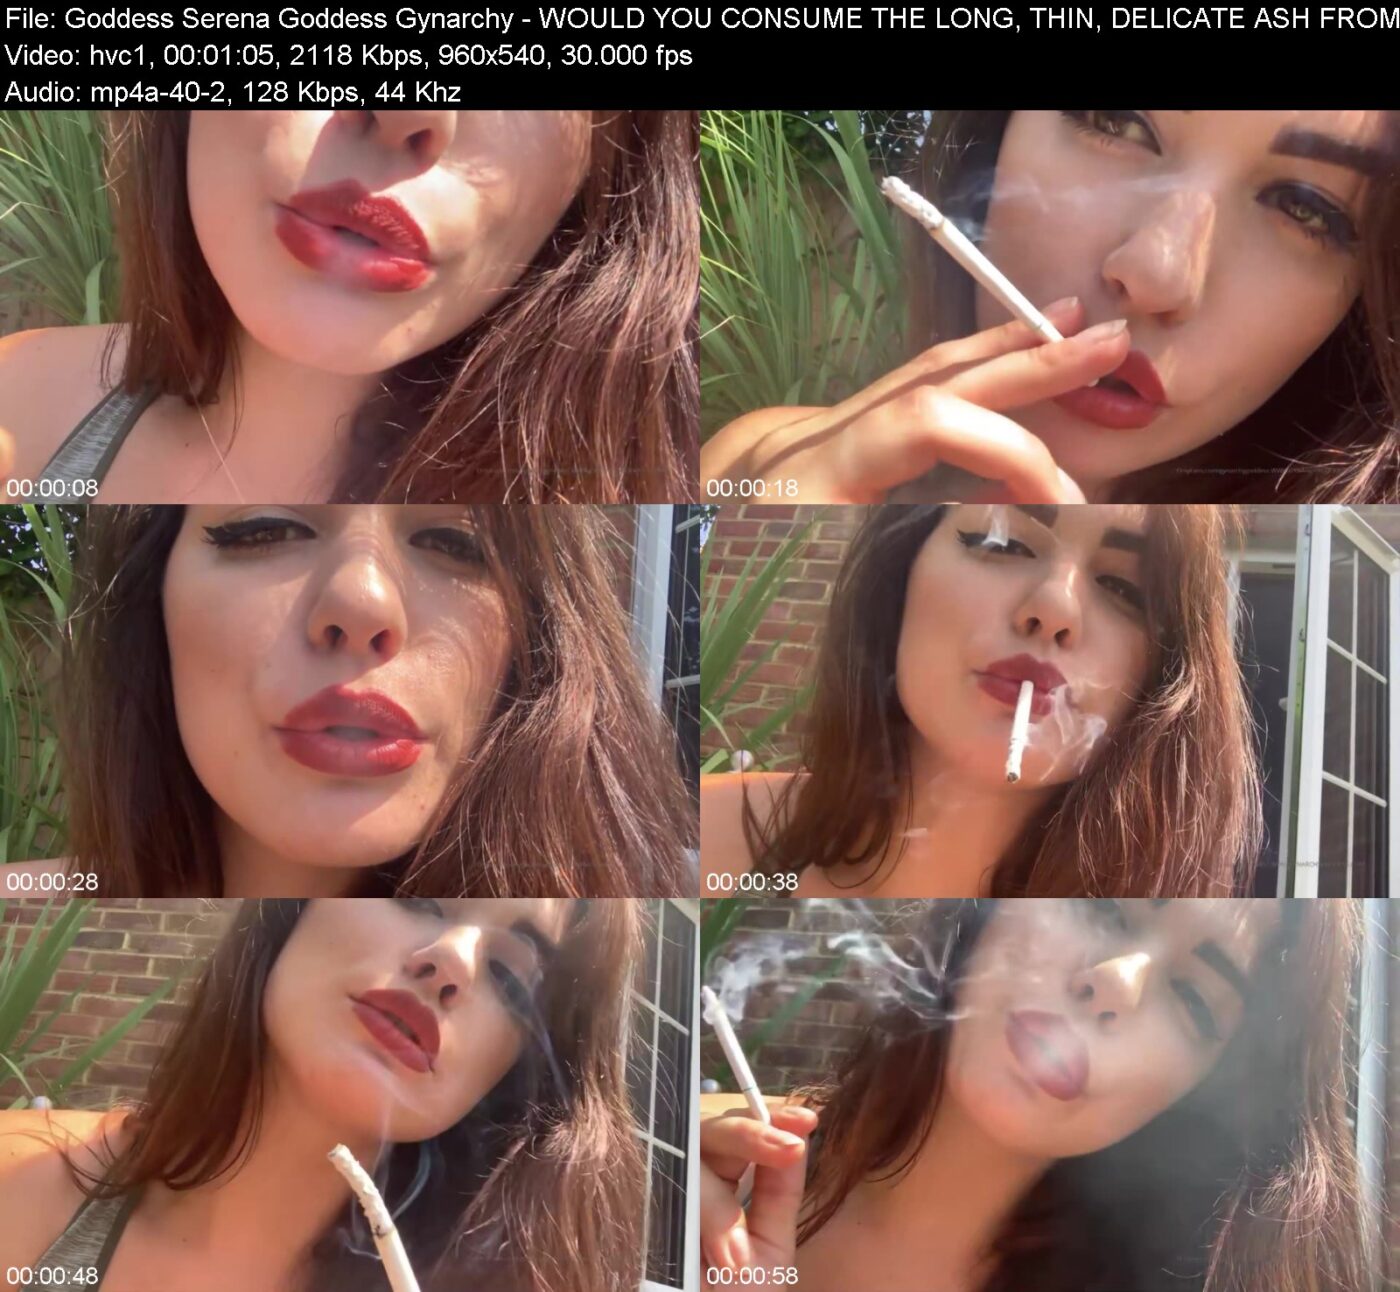 Goddess Serena Goddess Gynarchy in WOULD YOU CONSUME THE LONG, THIN, DELICATE ASH FROM THE BOTTOM OF MY SUPER SLIM CIGARETTE